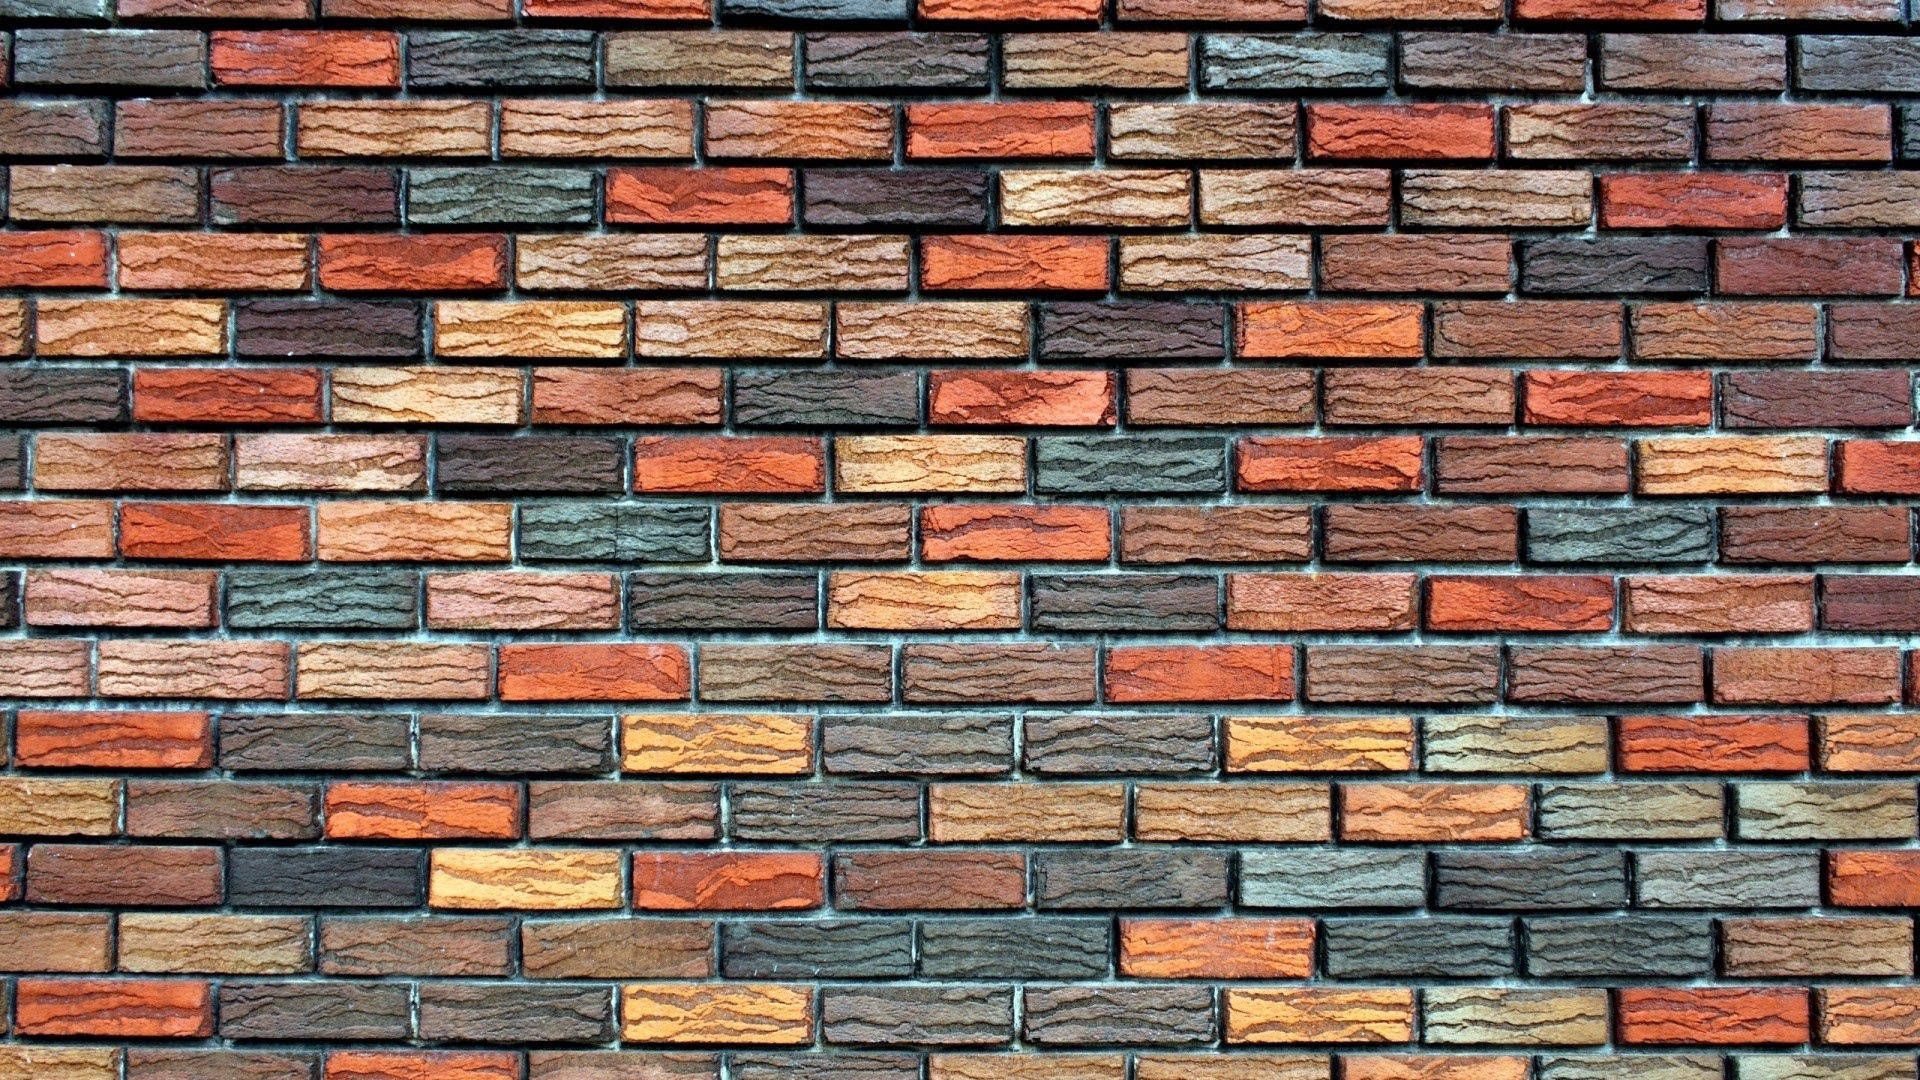 Brick 4k ultra hd 16:10 wallpapers hd, desktop backgrounds 3840x2400,  images and pictures